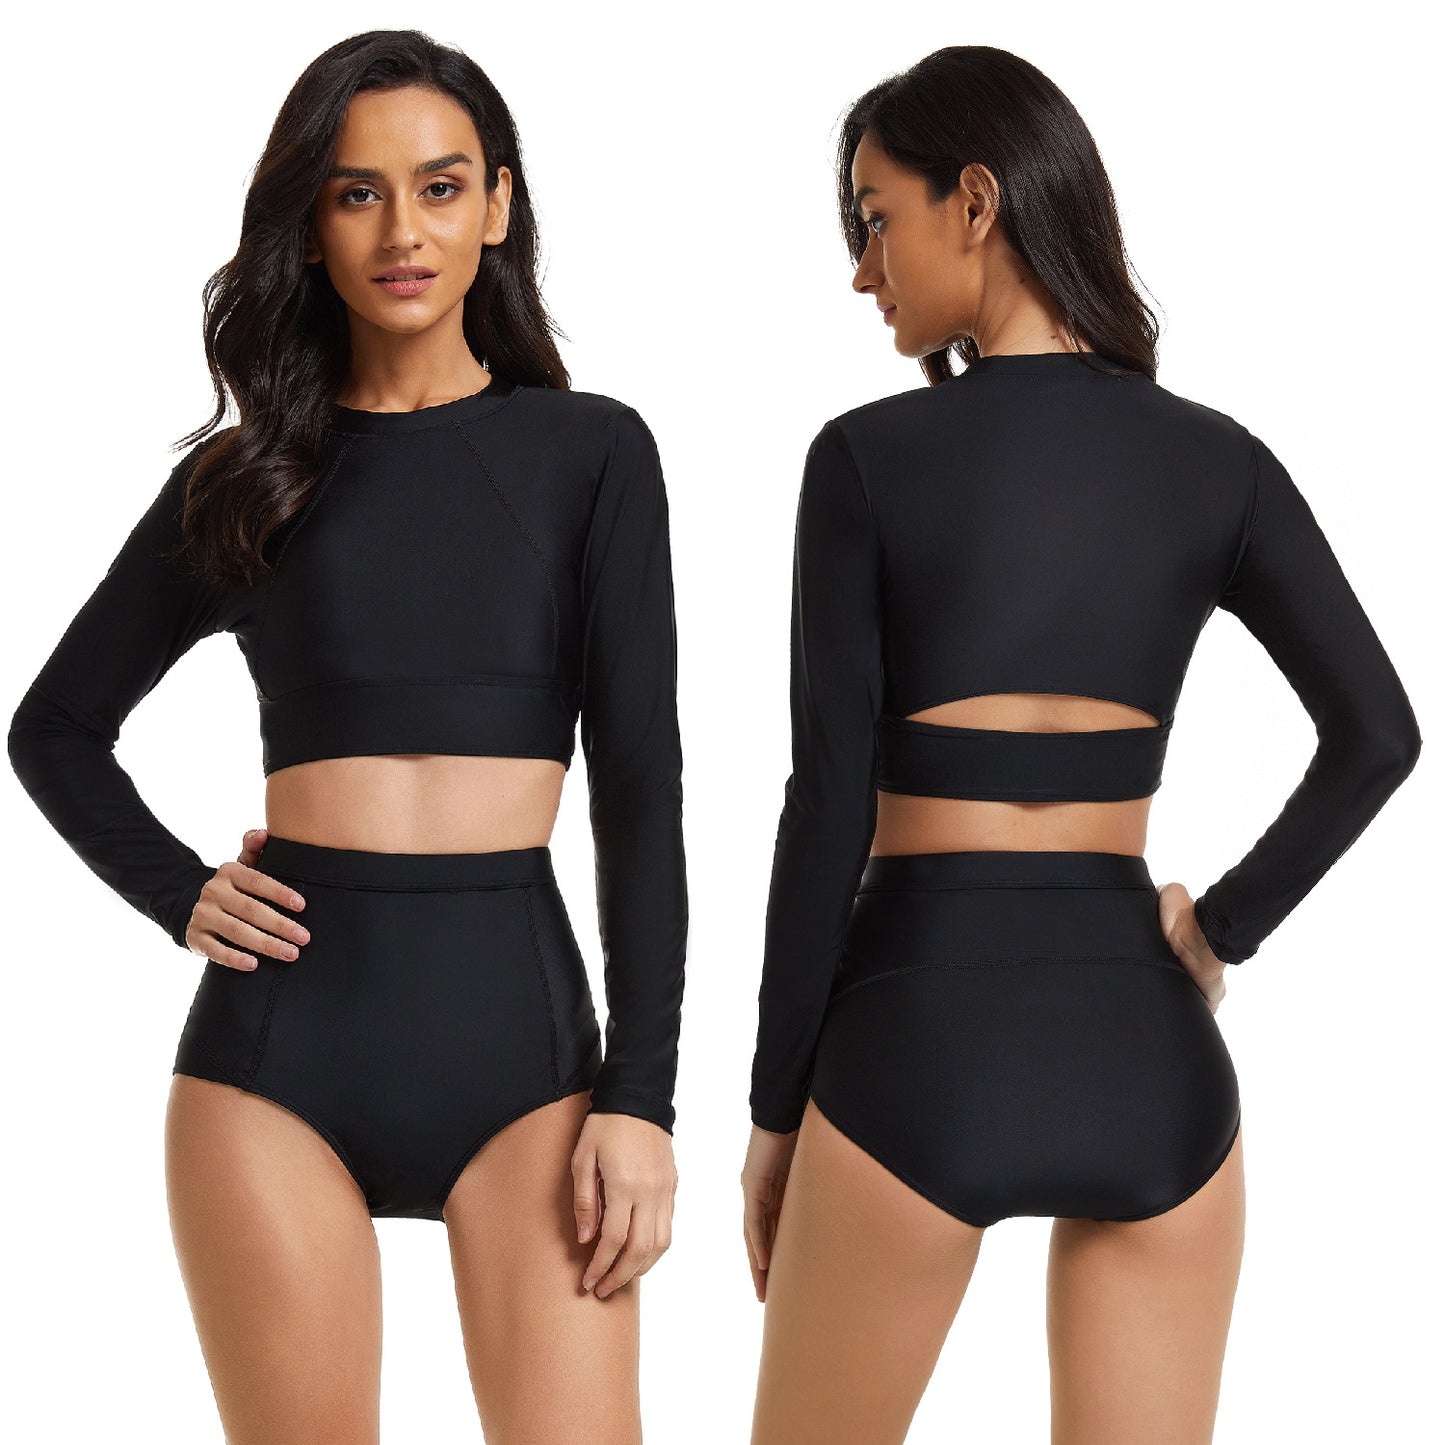 Black Long Sleeves Women Diving Swimsuits